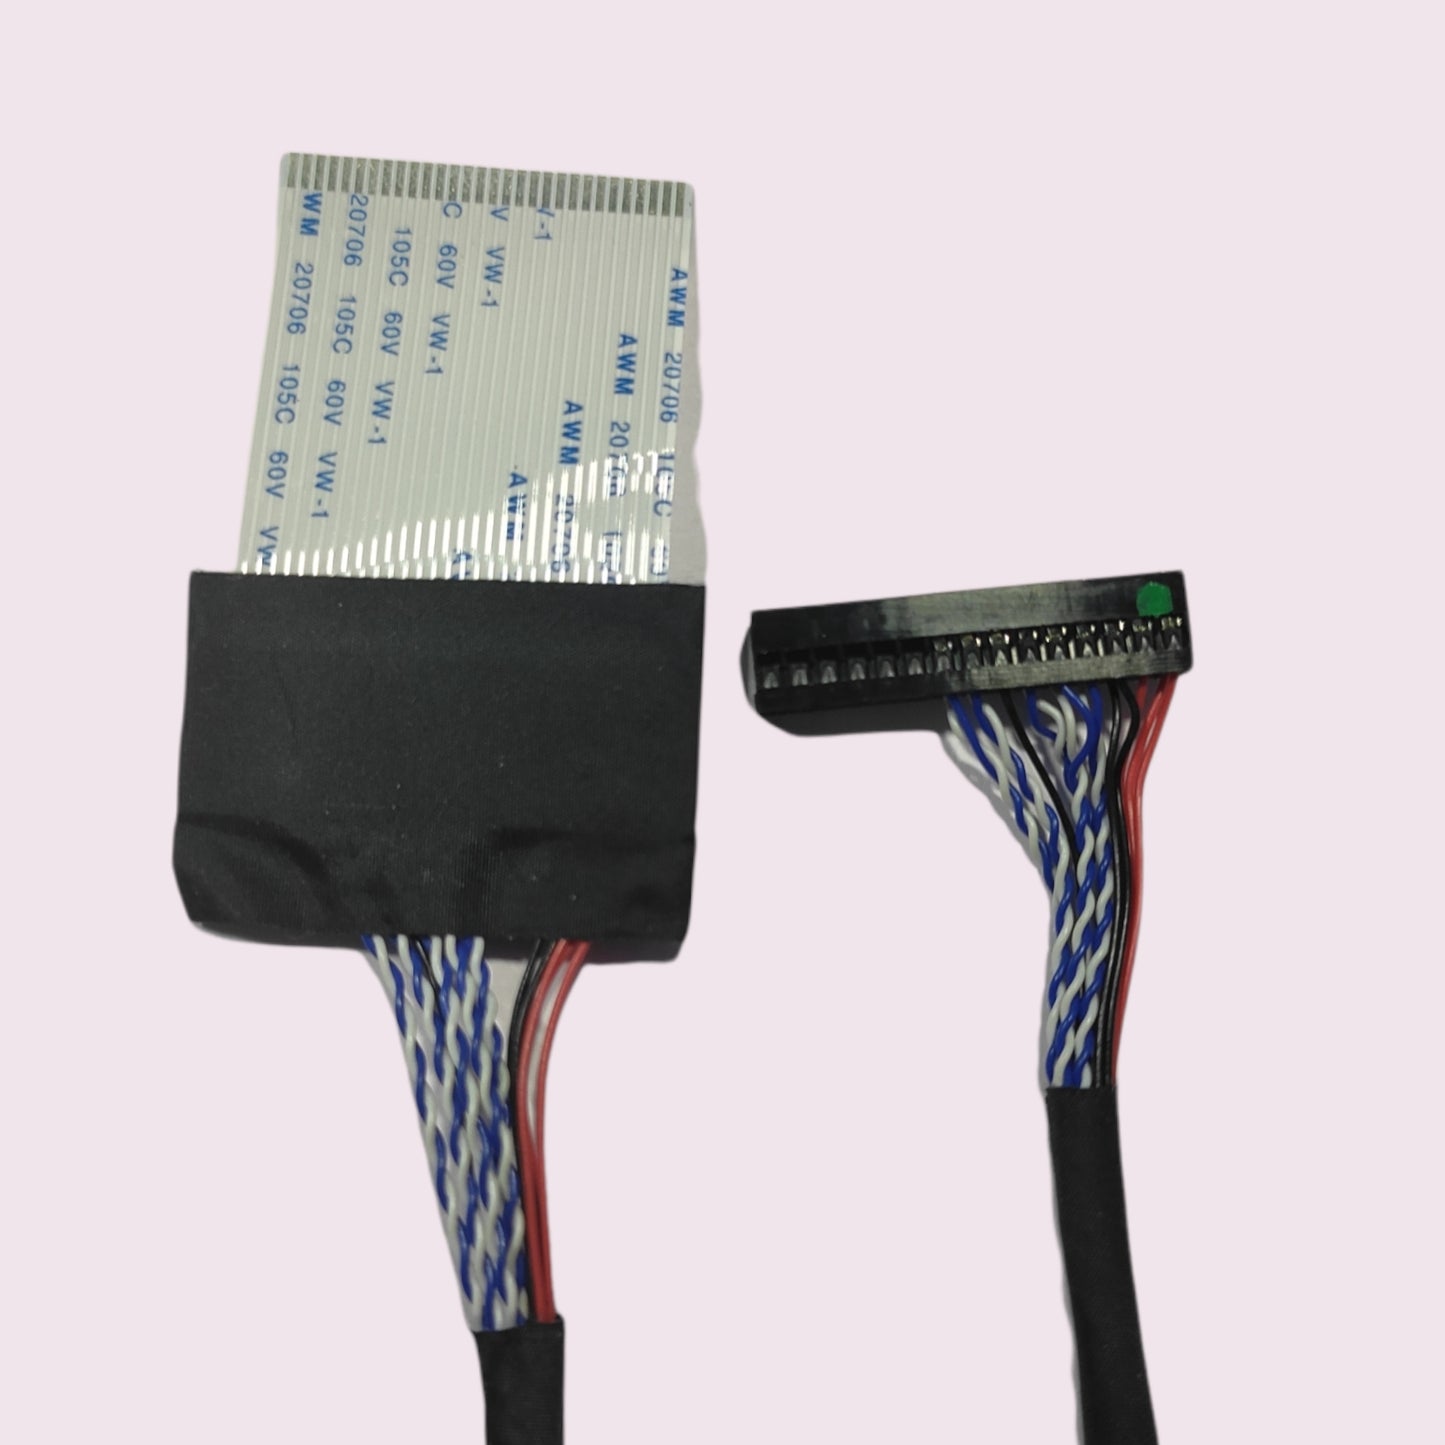 LVDS Cable 08 - Faritha